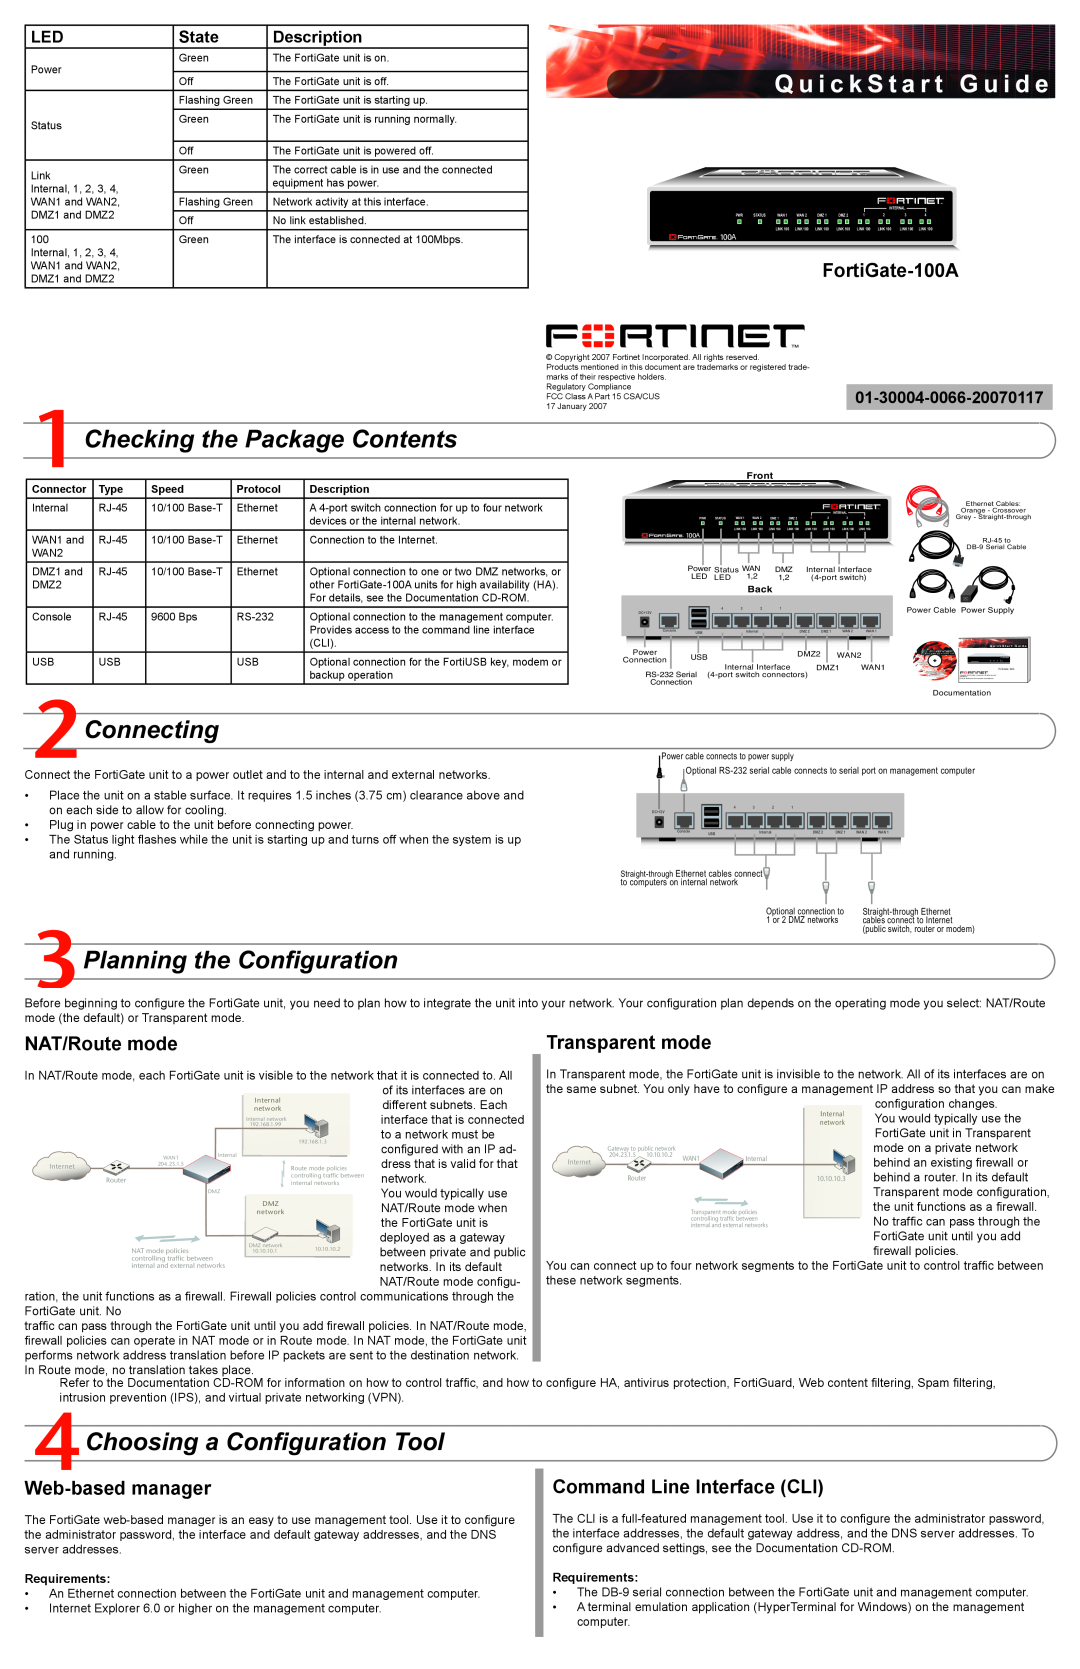 Fortinet 100A quick start Checking the Package Contents, Connecting, Planning the Configuration, NAT/Route mode, State 